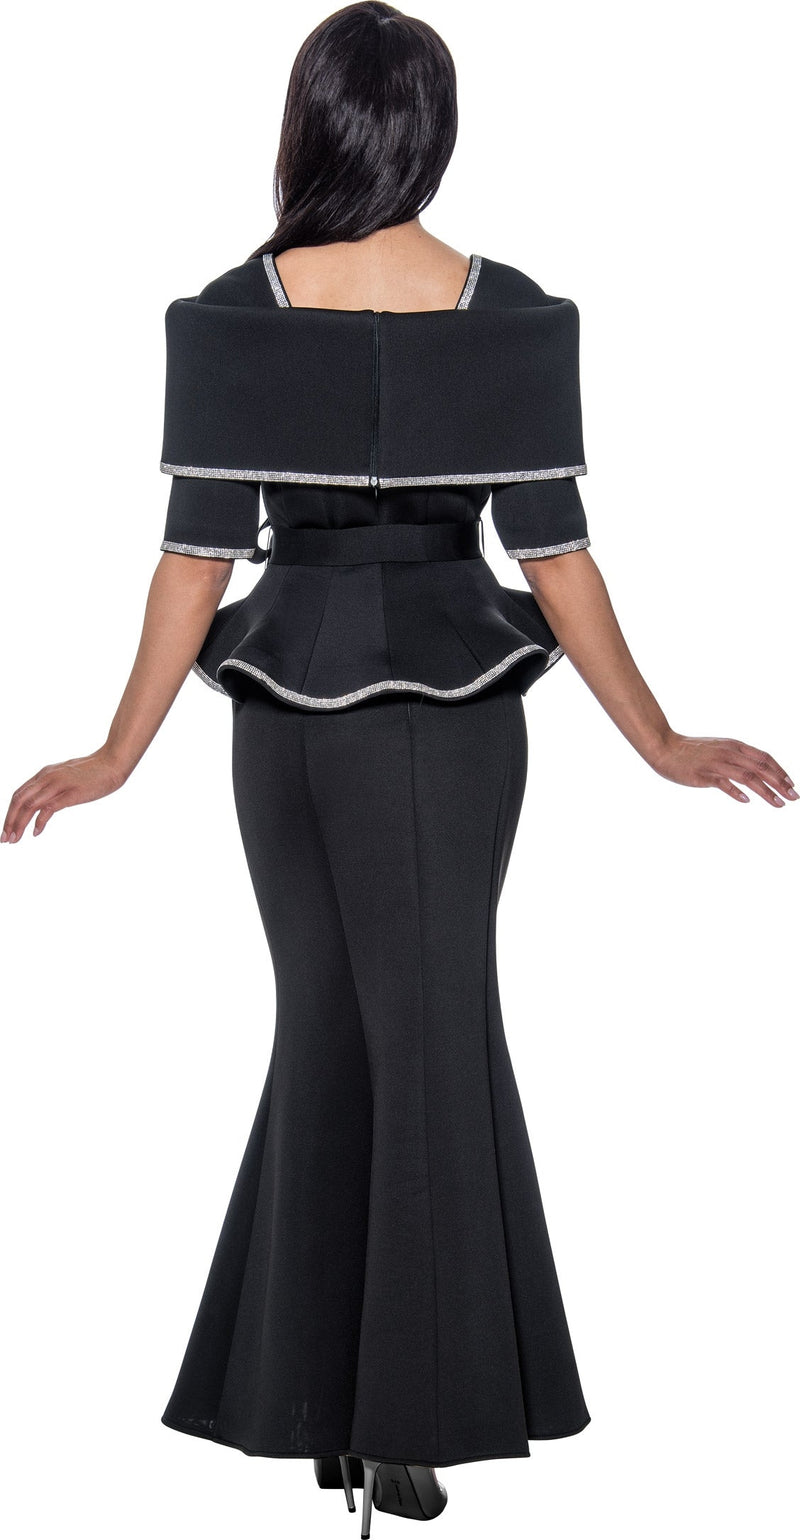 Stellar Looks Skirt Suit 1692-Black - Church Suits For Less